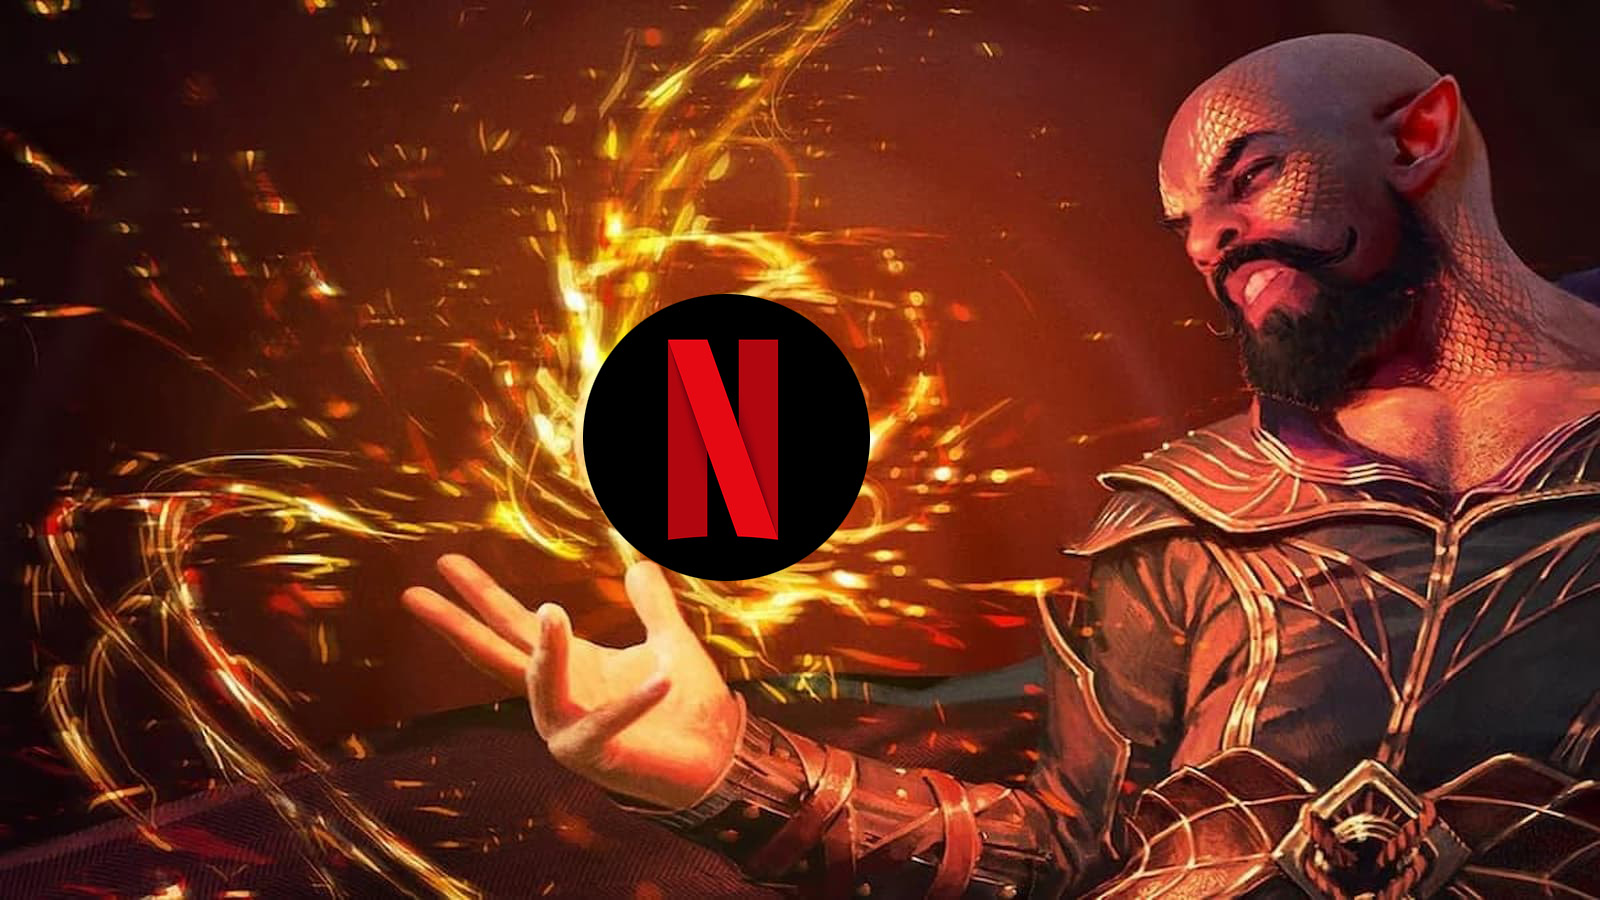 Baldur's Gate 3 Live-Action Series/Movie Being Developed By Netflix, Says  New Report